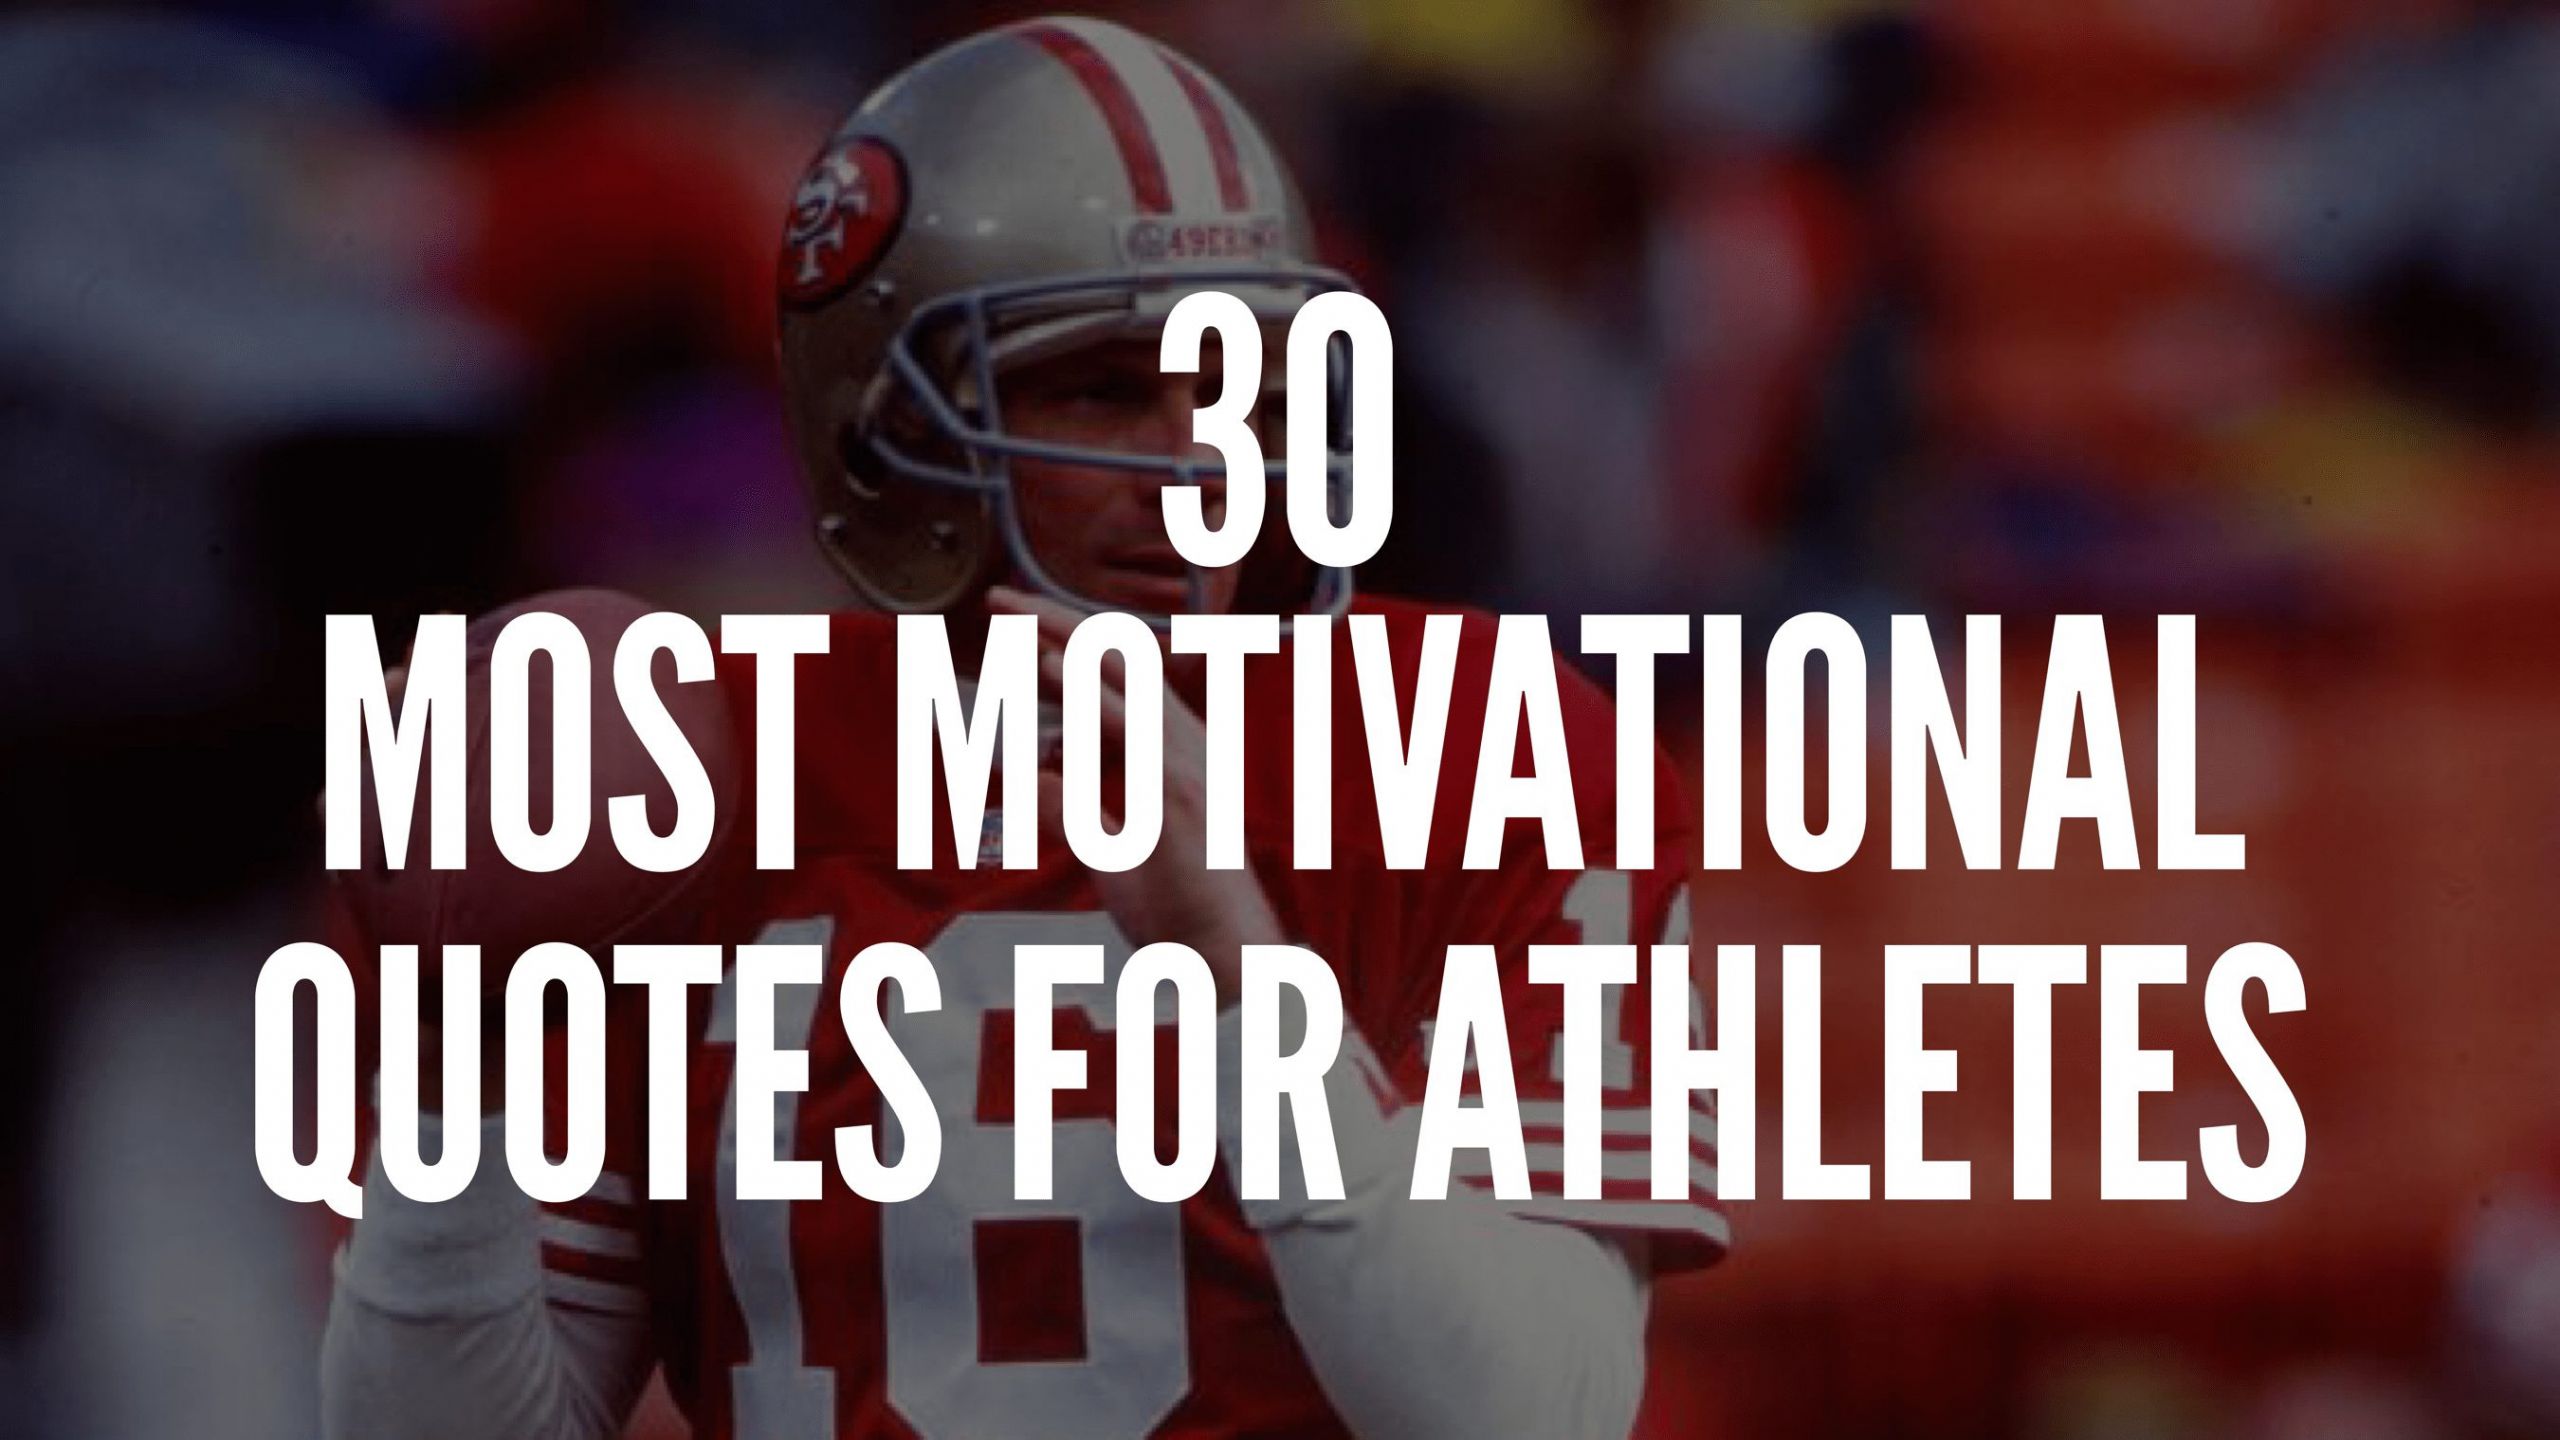 Short Motivational Quotes For Athletes
 30 Most Motivational Quotes For Athletes